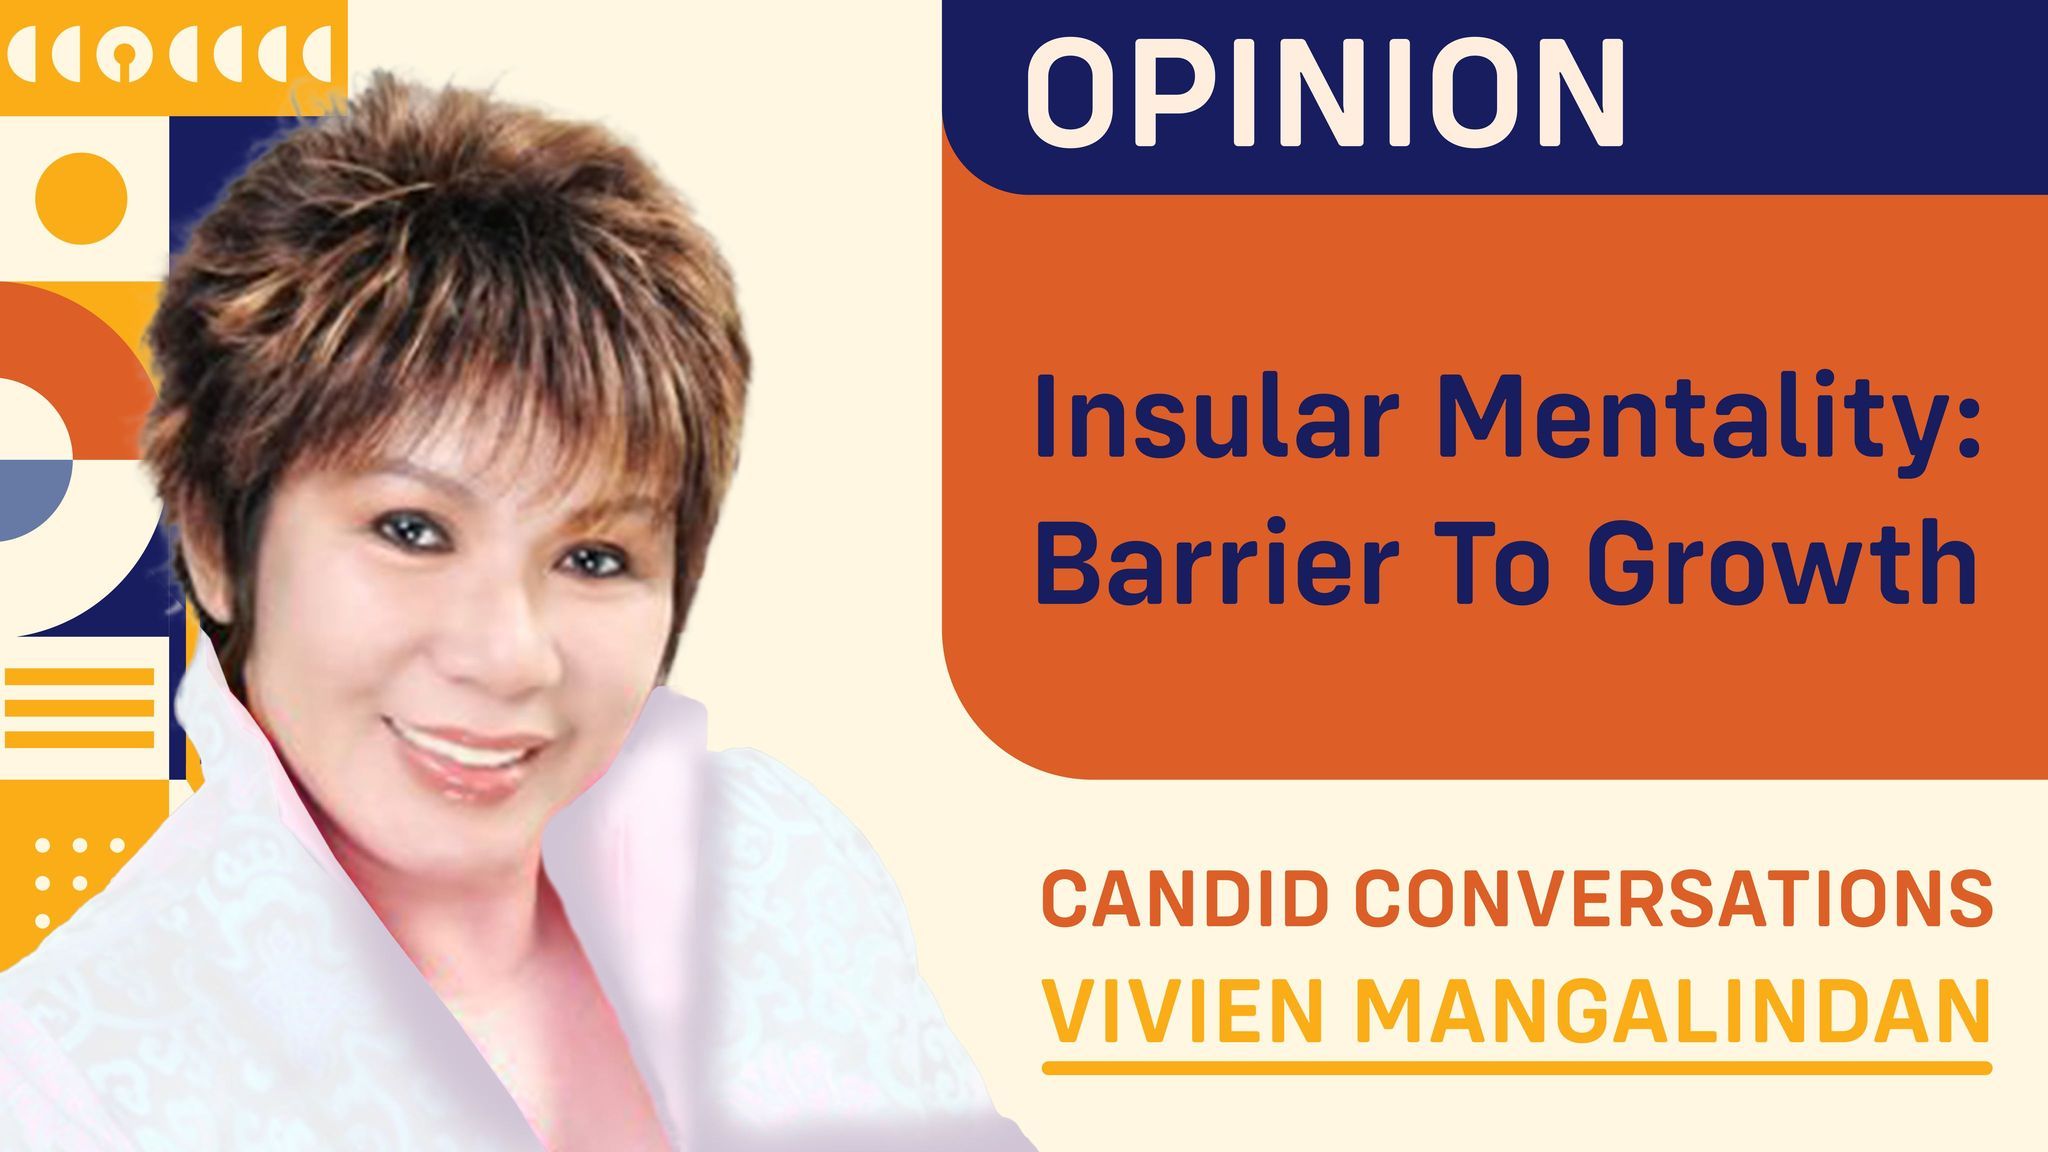  Insular Mentality: Barrier To Growth